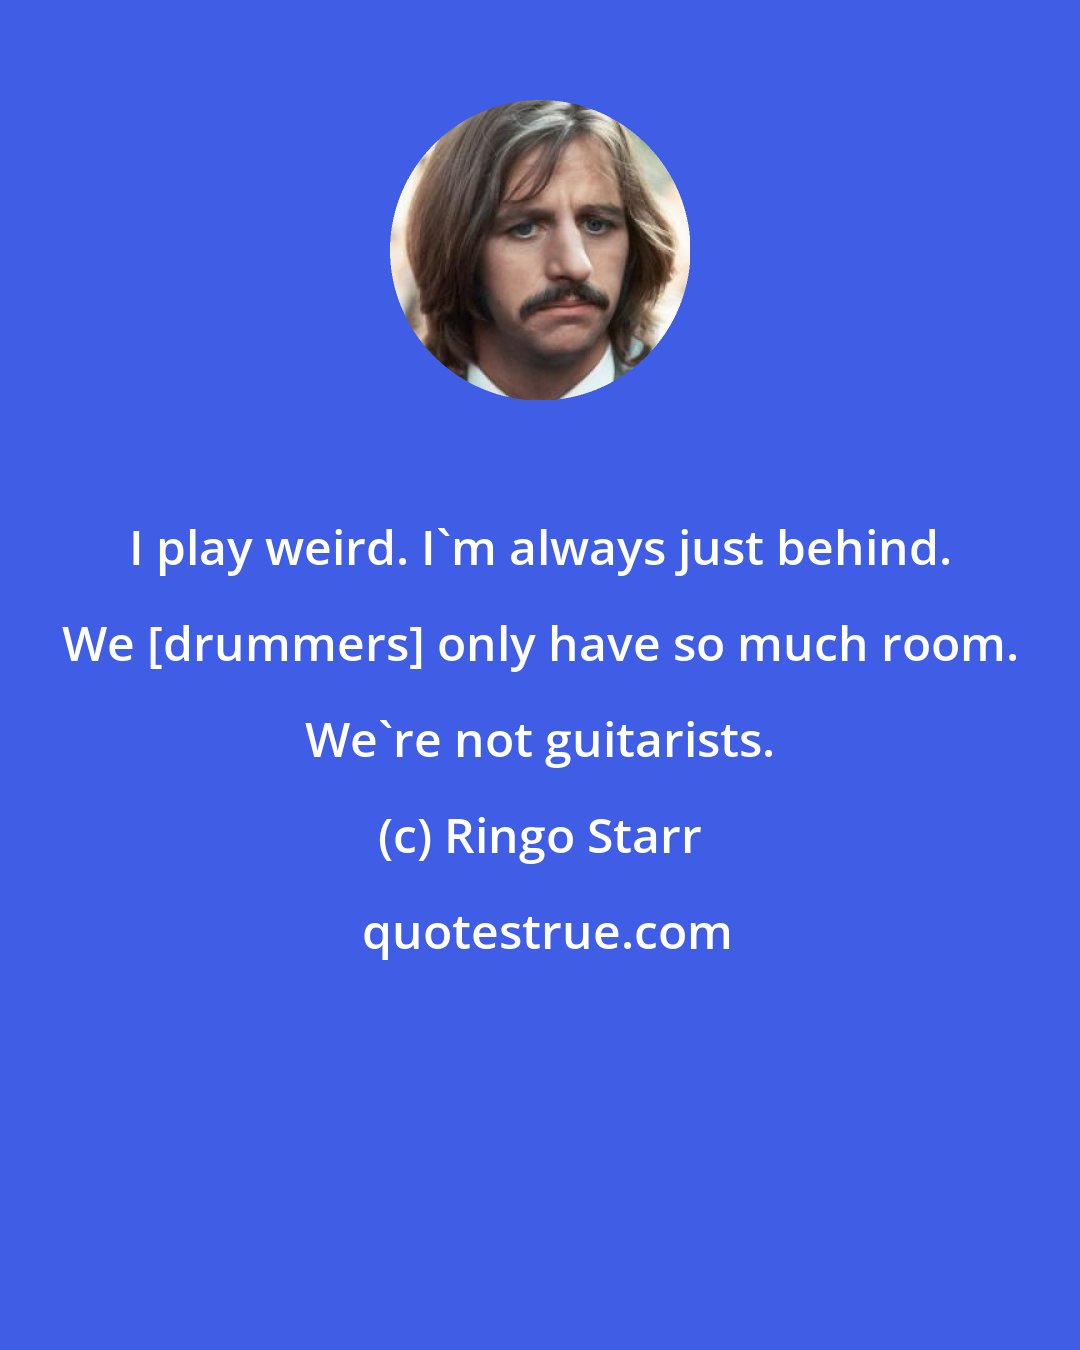 Ringo Starr: I play weird. I'm always just behind. We [drummers] only have so much room. We're not guitarists.